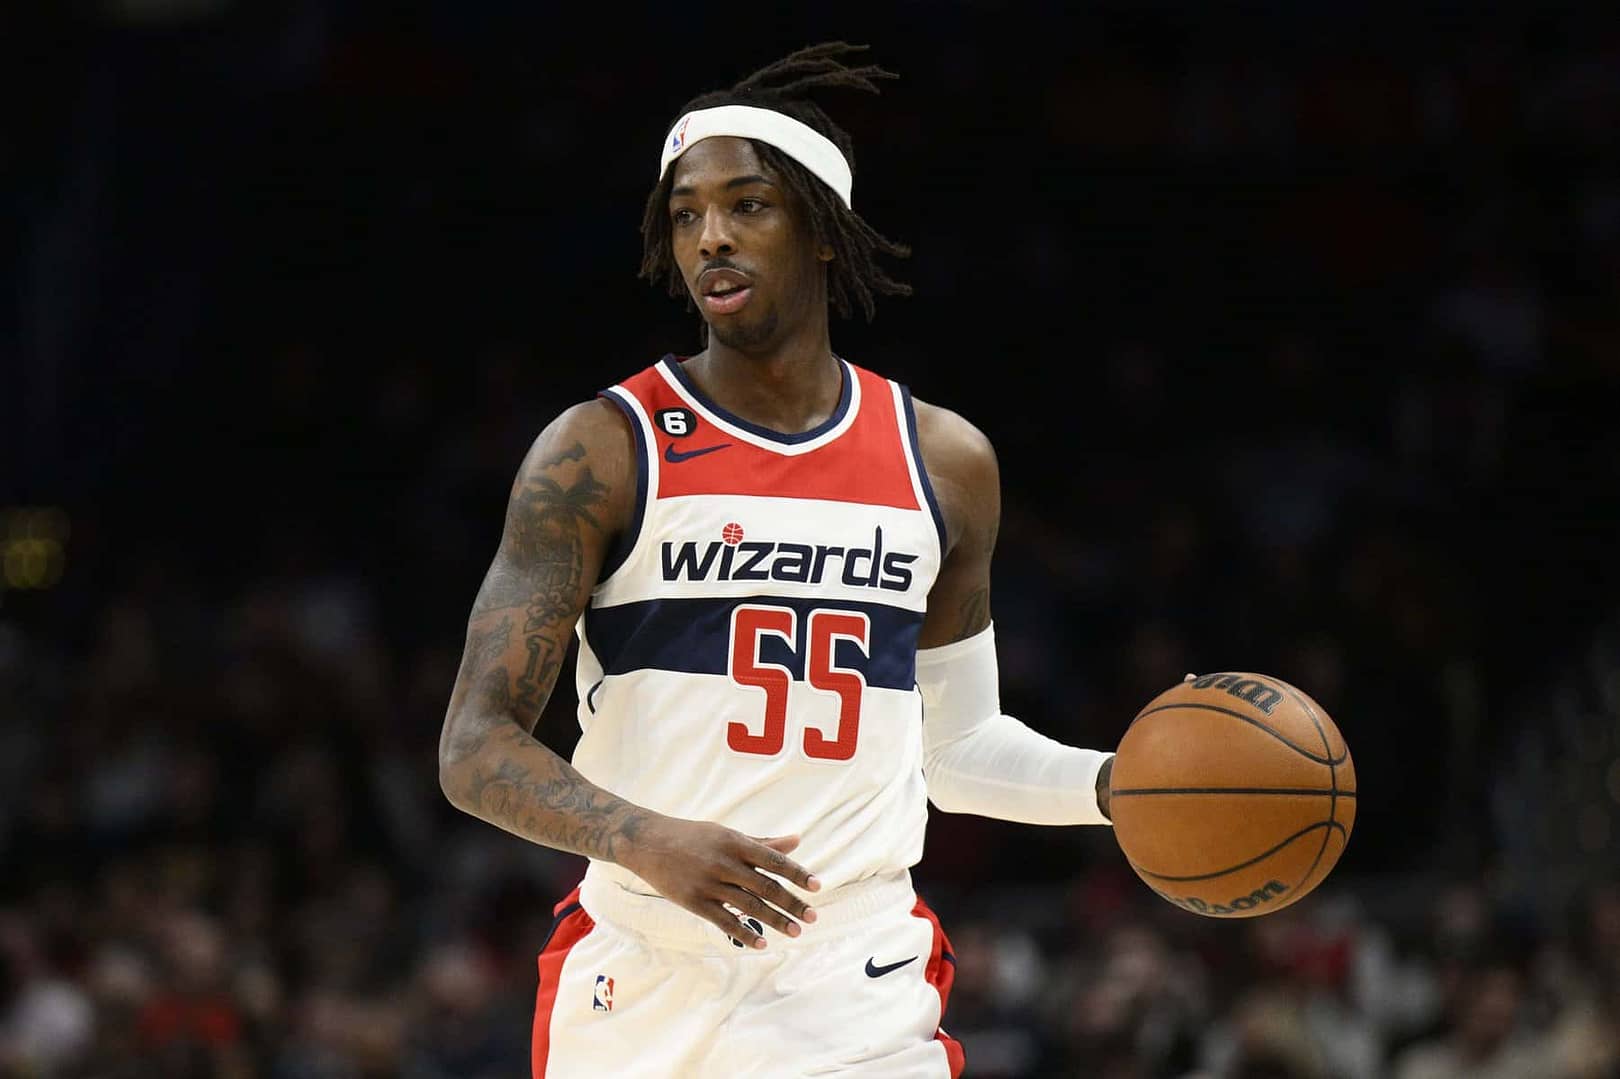 Washington hosts Toronto on Thursday, and an NBA Raptors-Wizards player prop for Delon Wright's turnovers has value...